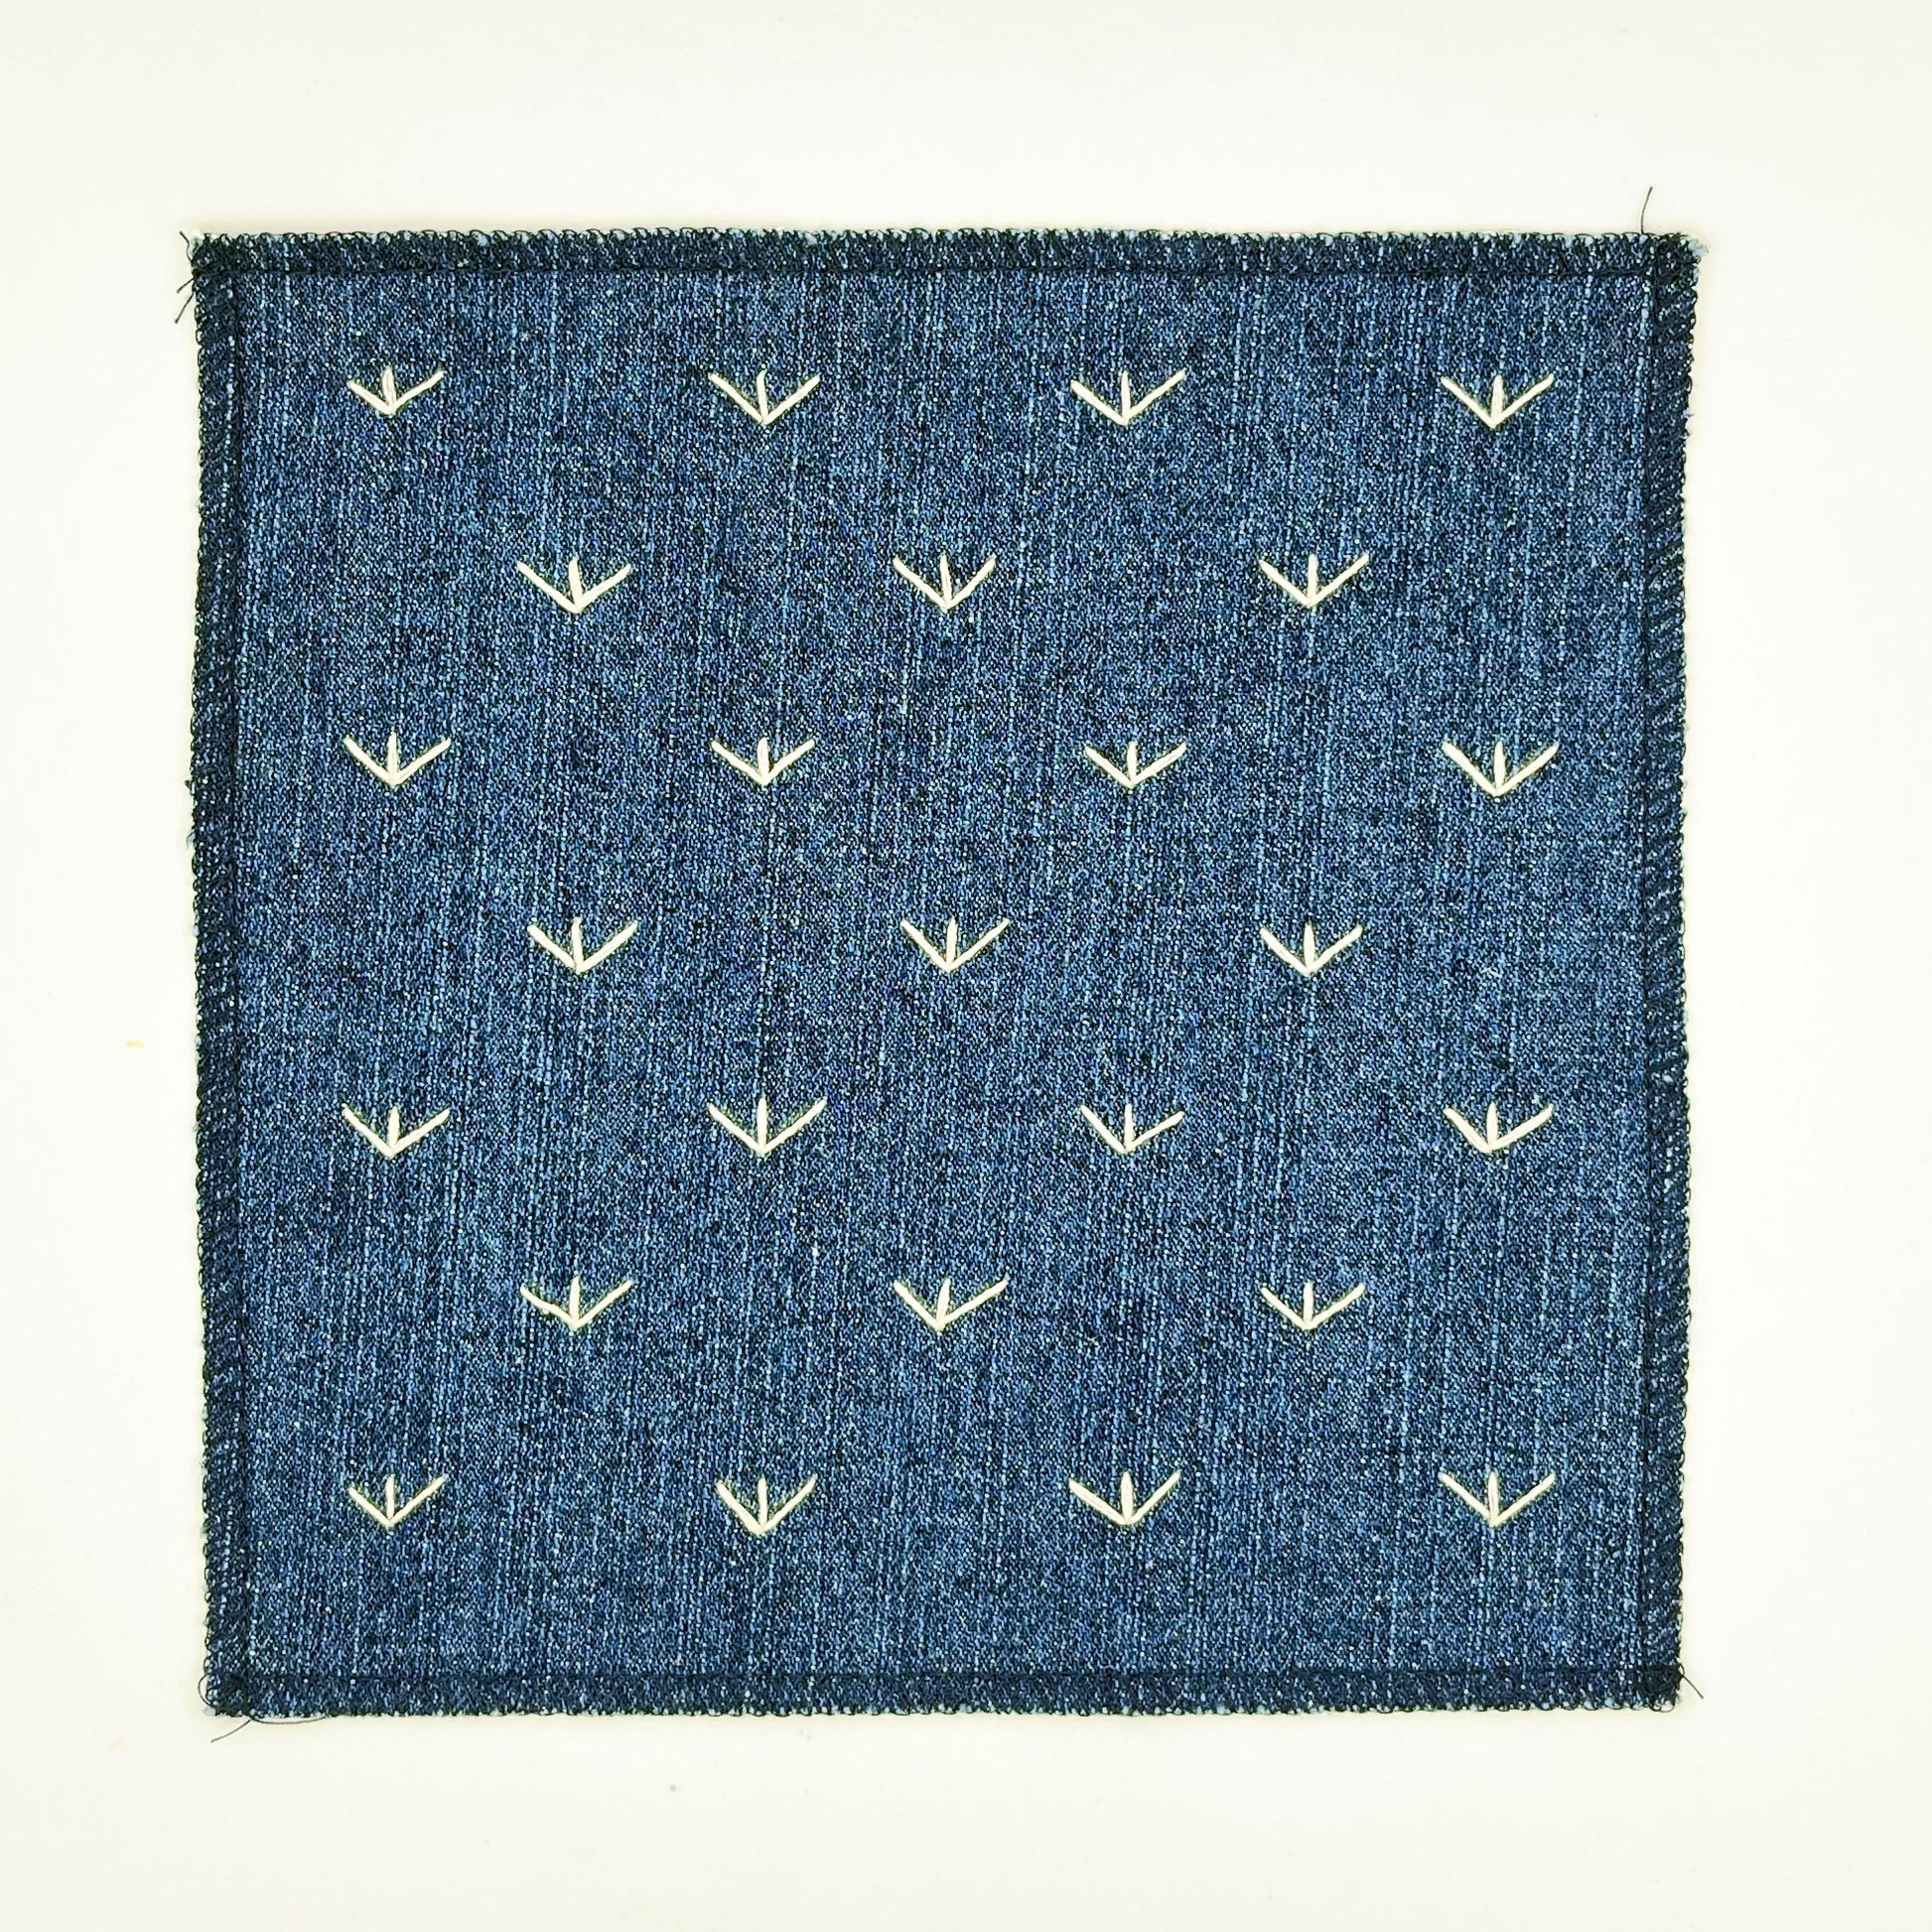 a square denim patch, with ivory stitches that look like birds feet or sprouts spread out in a diamond pattern, with overlocked edges, on a white background